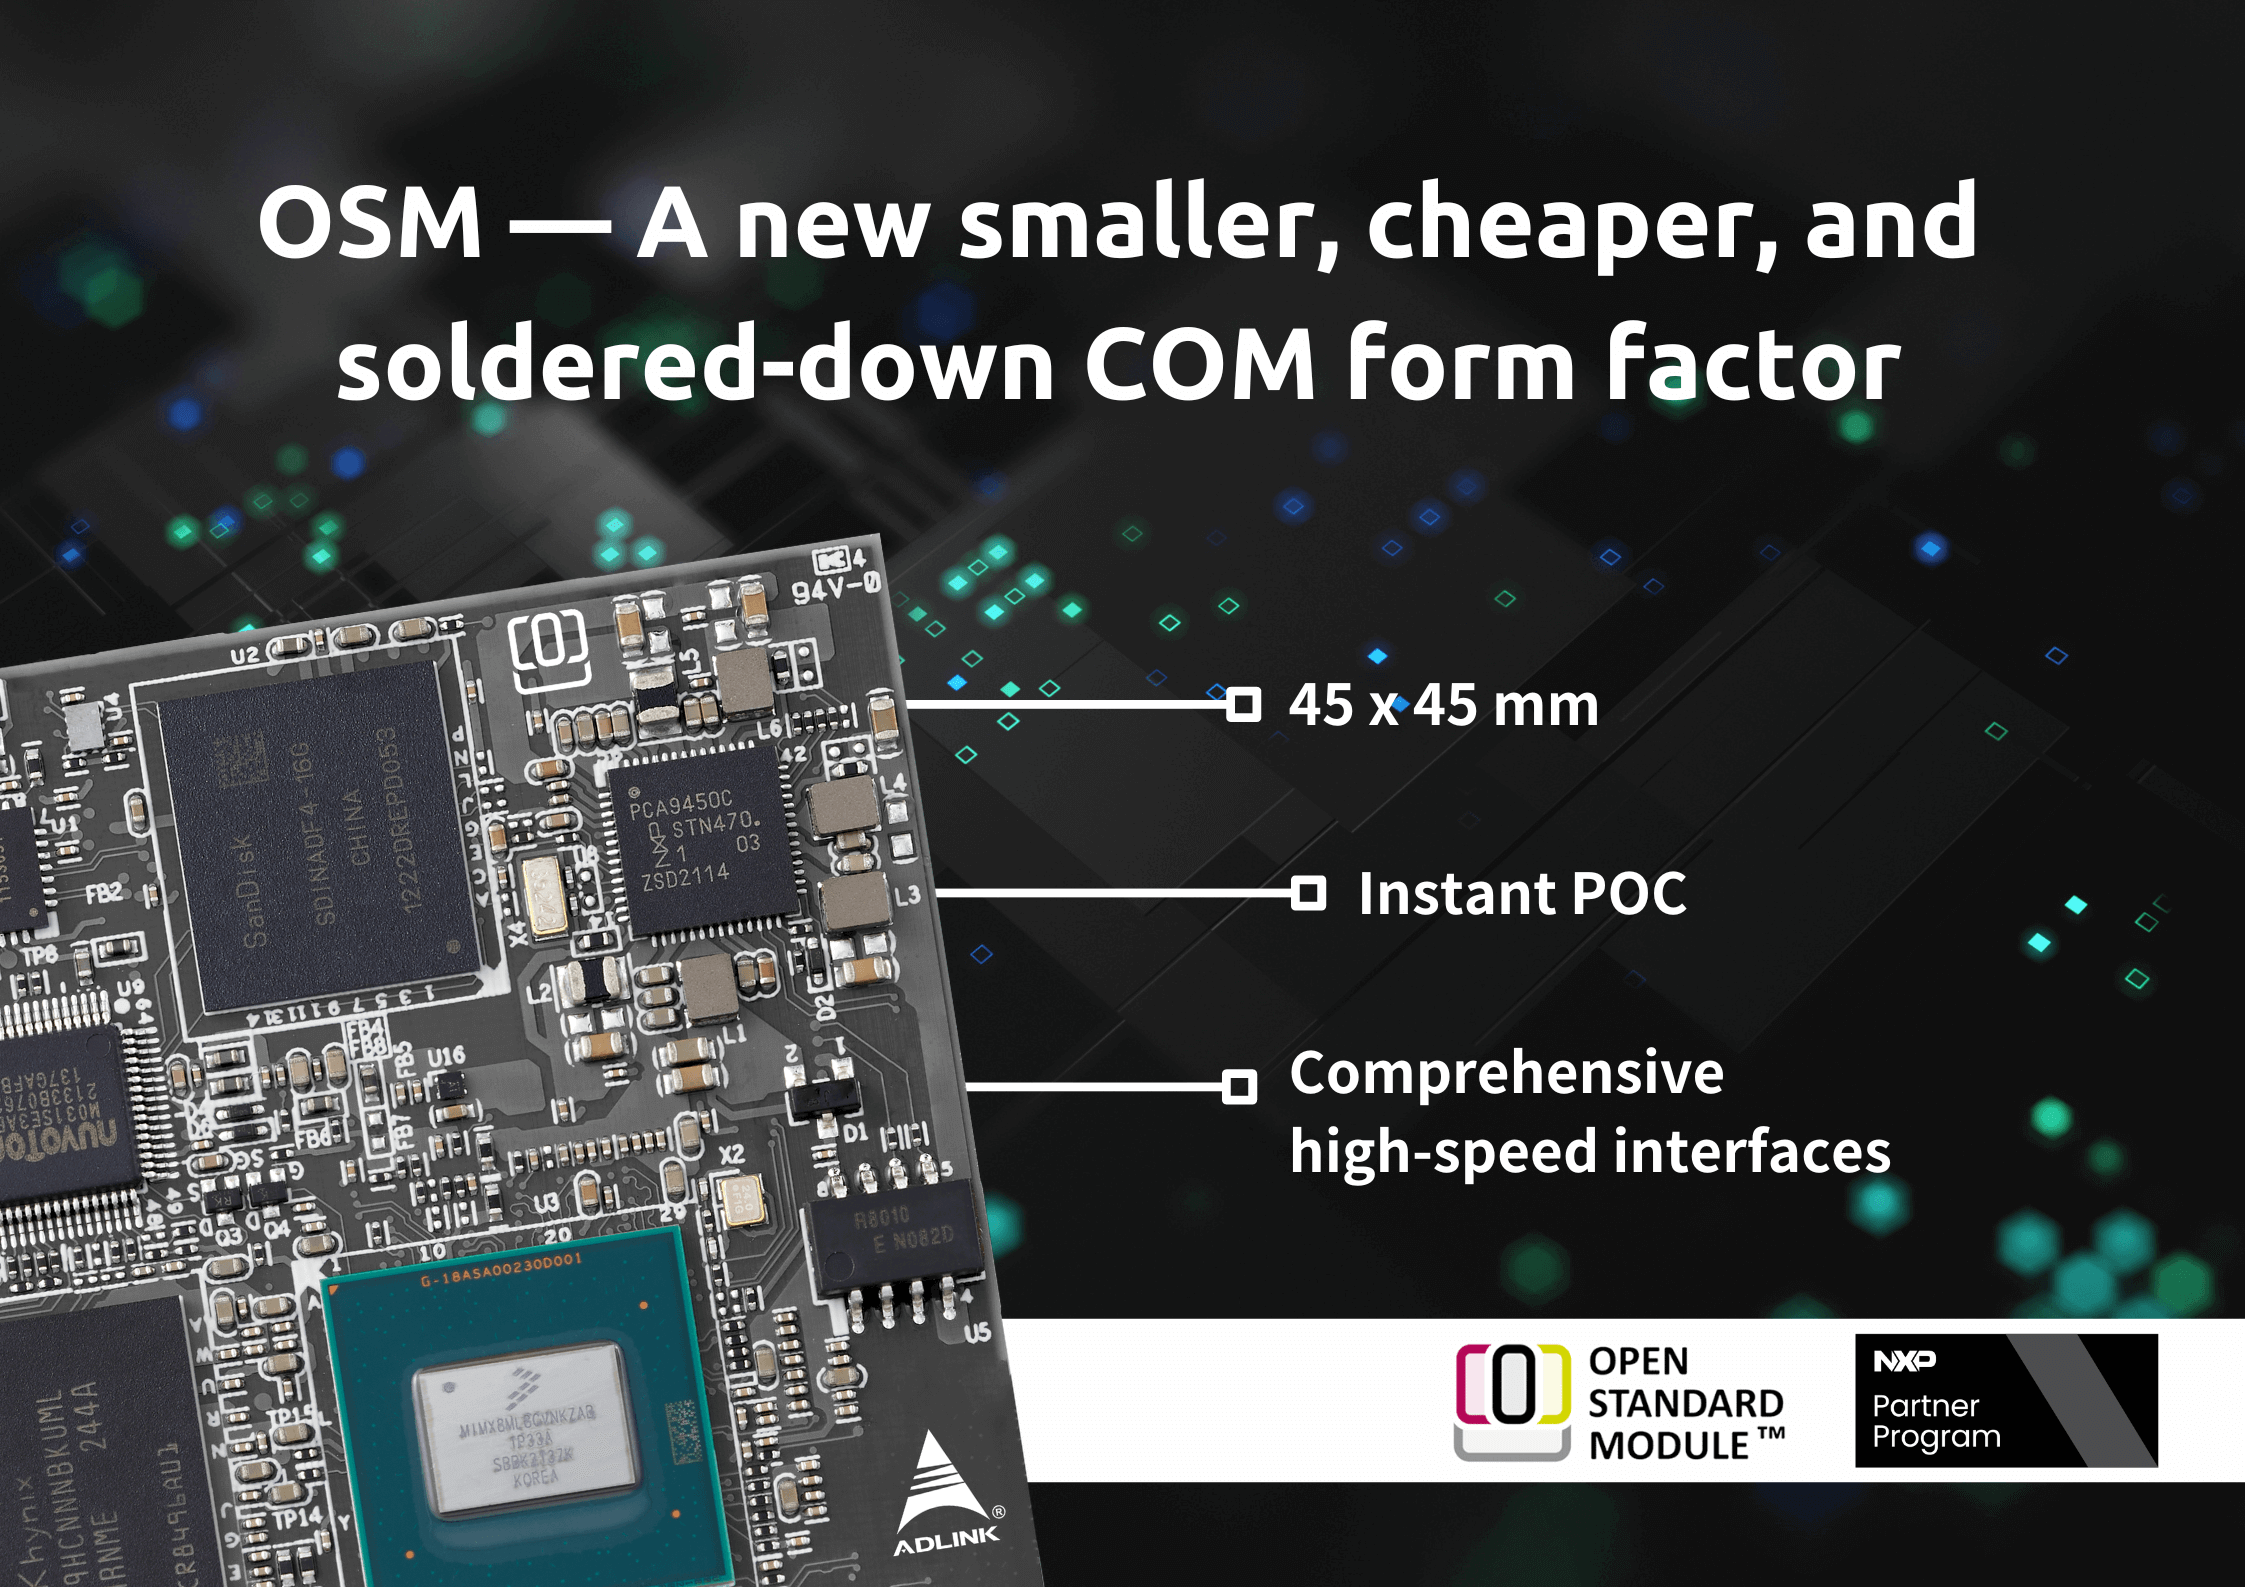 OSM — a new smaller, cheaper, and soldered-down COM form factor